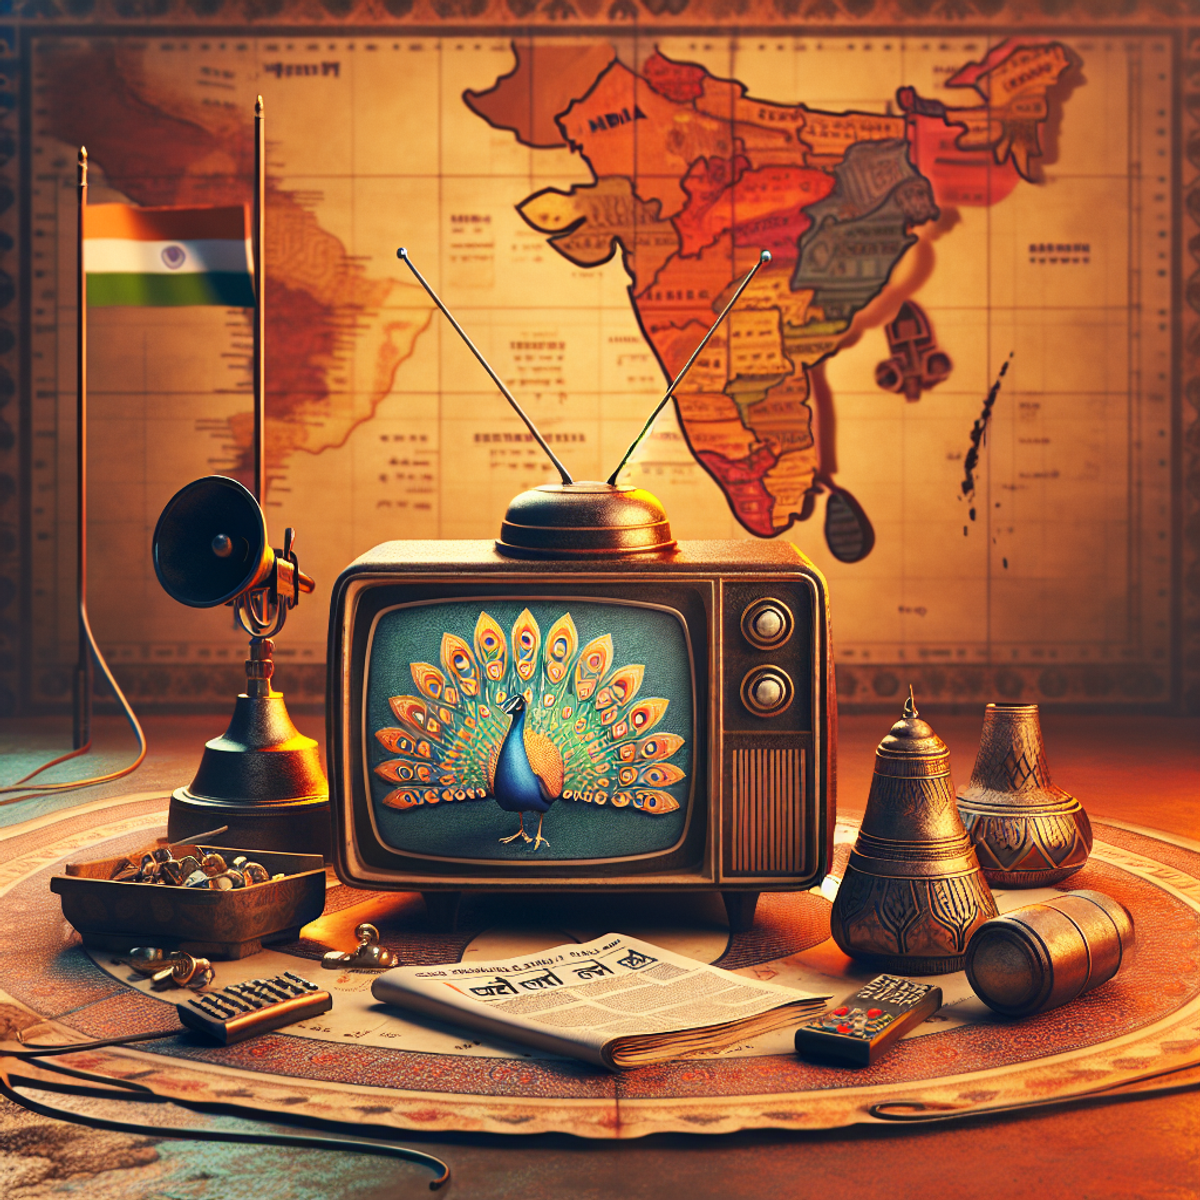 A traditional Indian television set displaying the vibrant colors of a peacock, surrounded by an antenna, a microphone, and a map of India in a warm household setting.